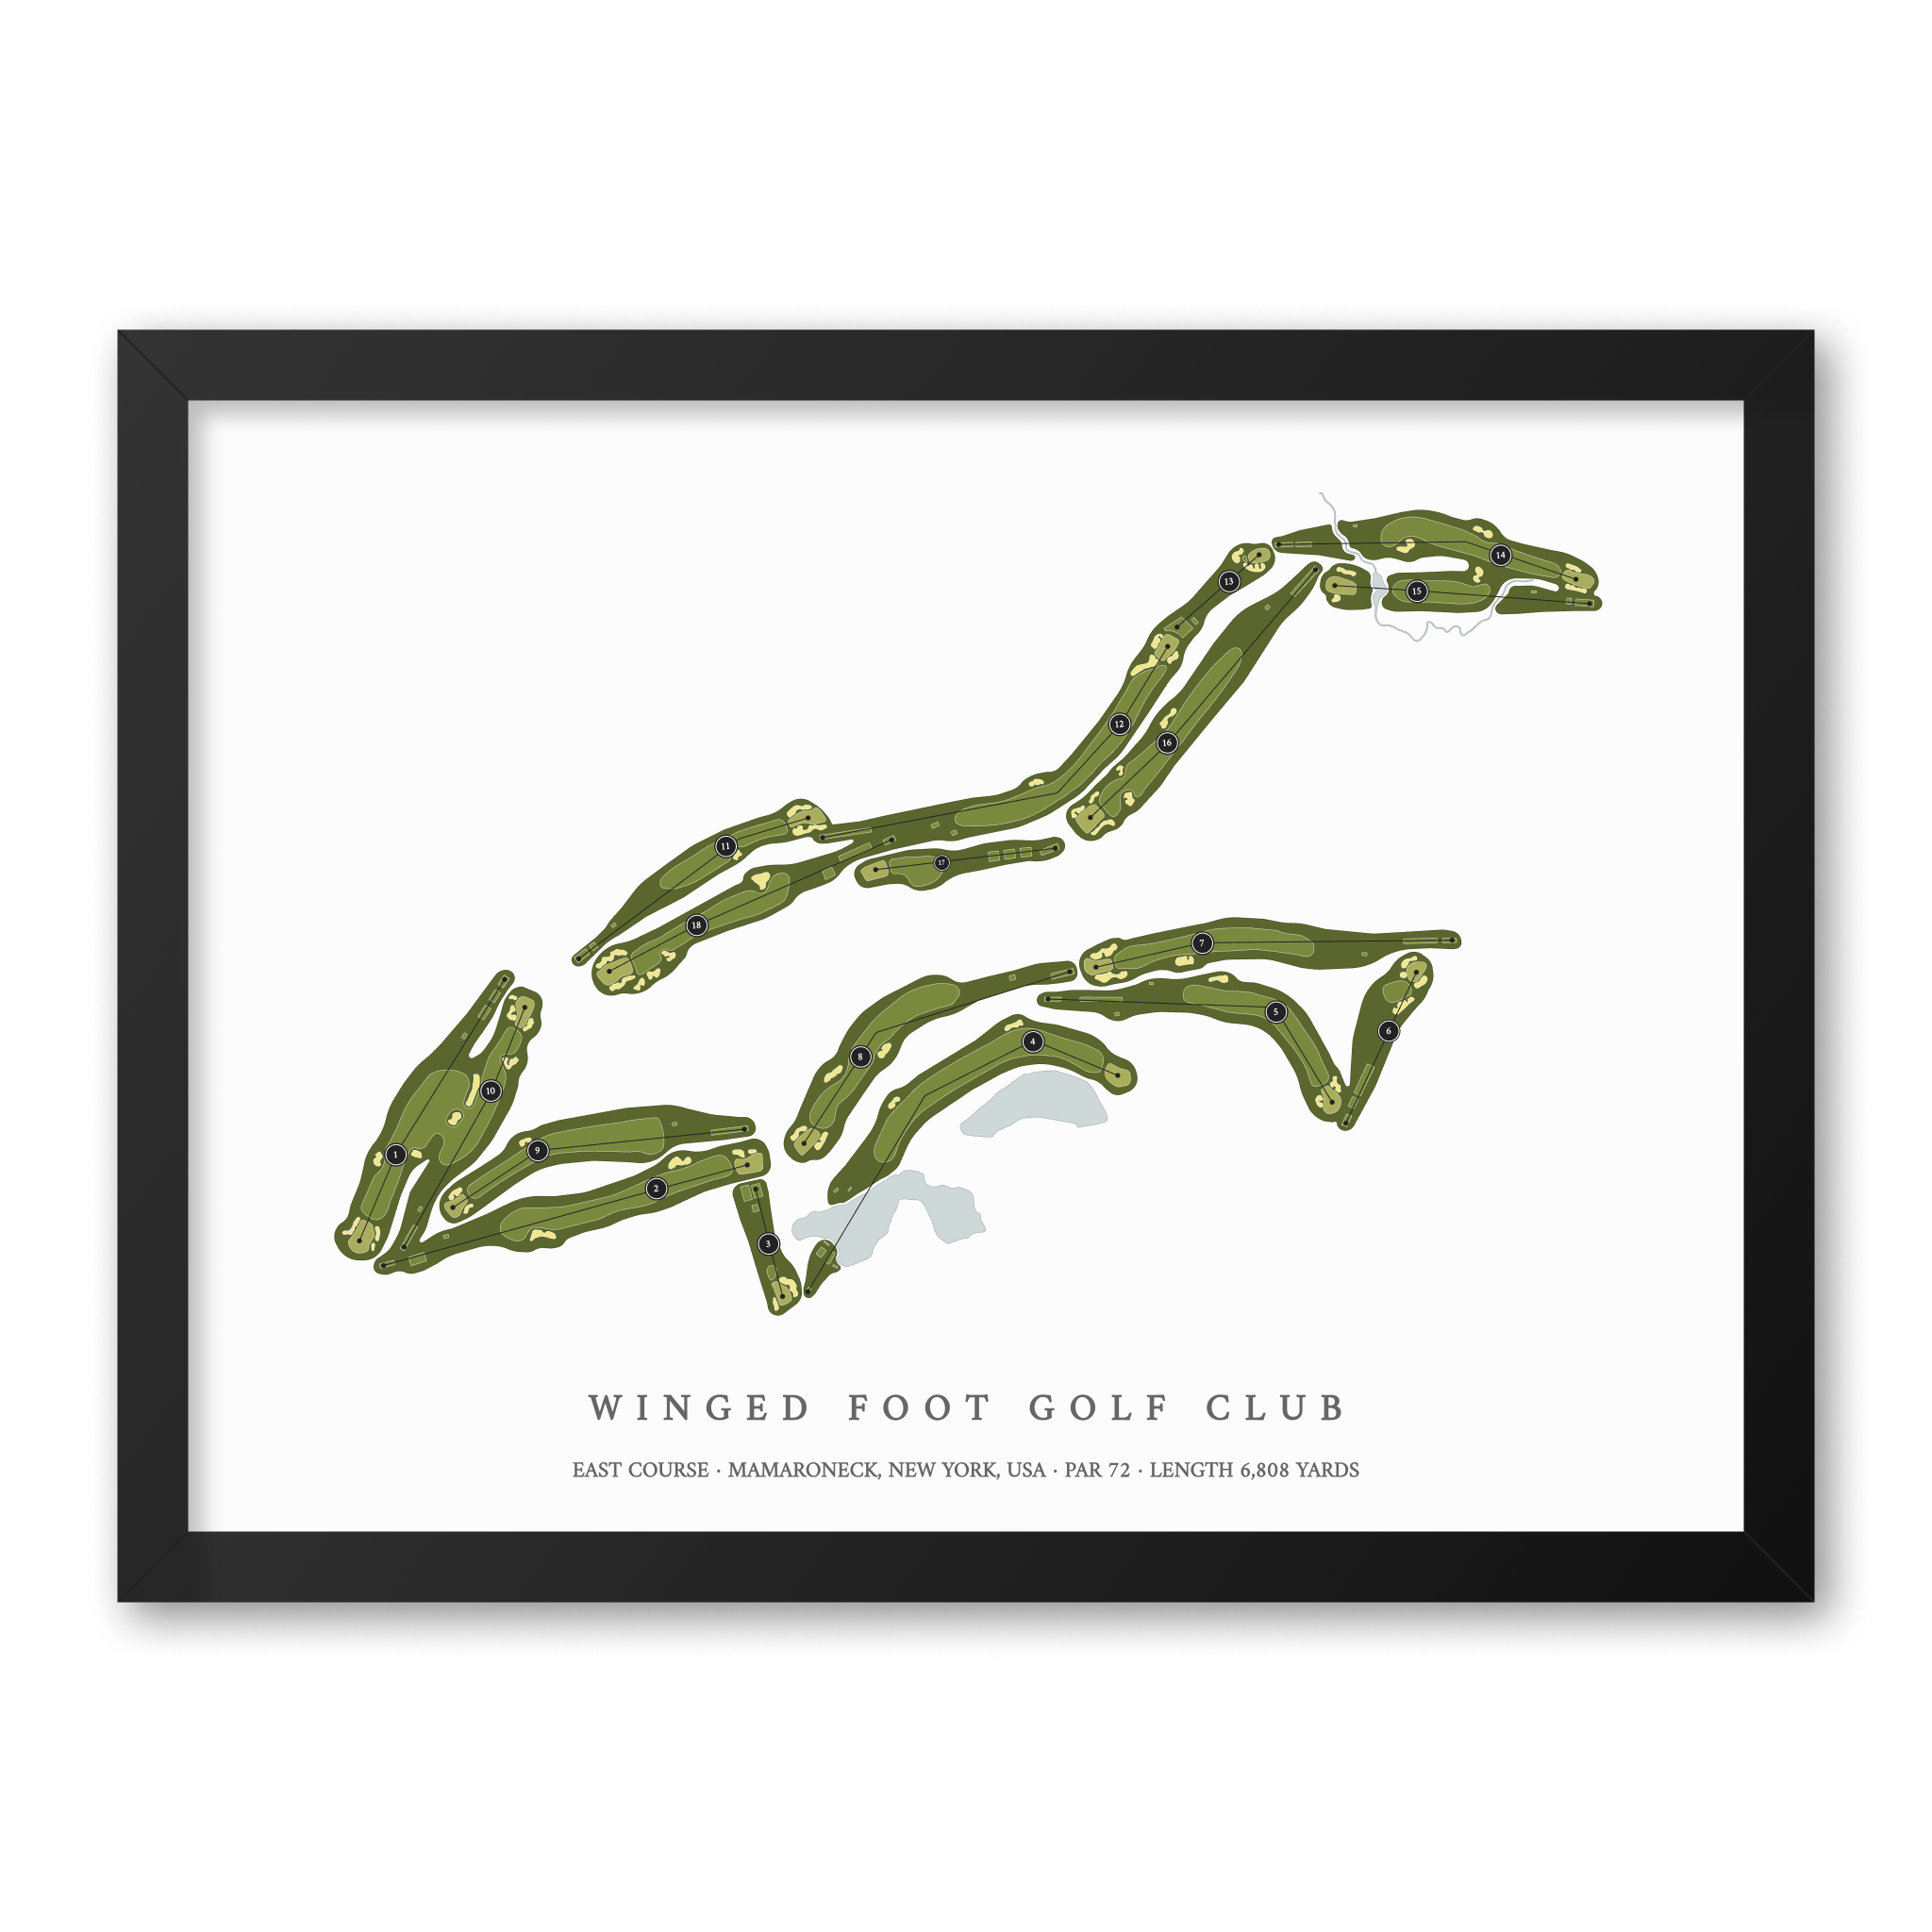 Winged Foot Golf Club - East Course | Golf Course Print | Black Frame